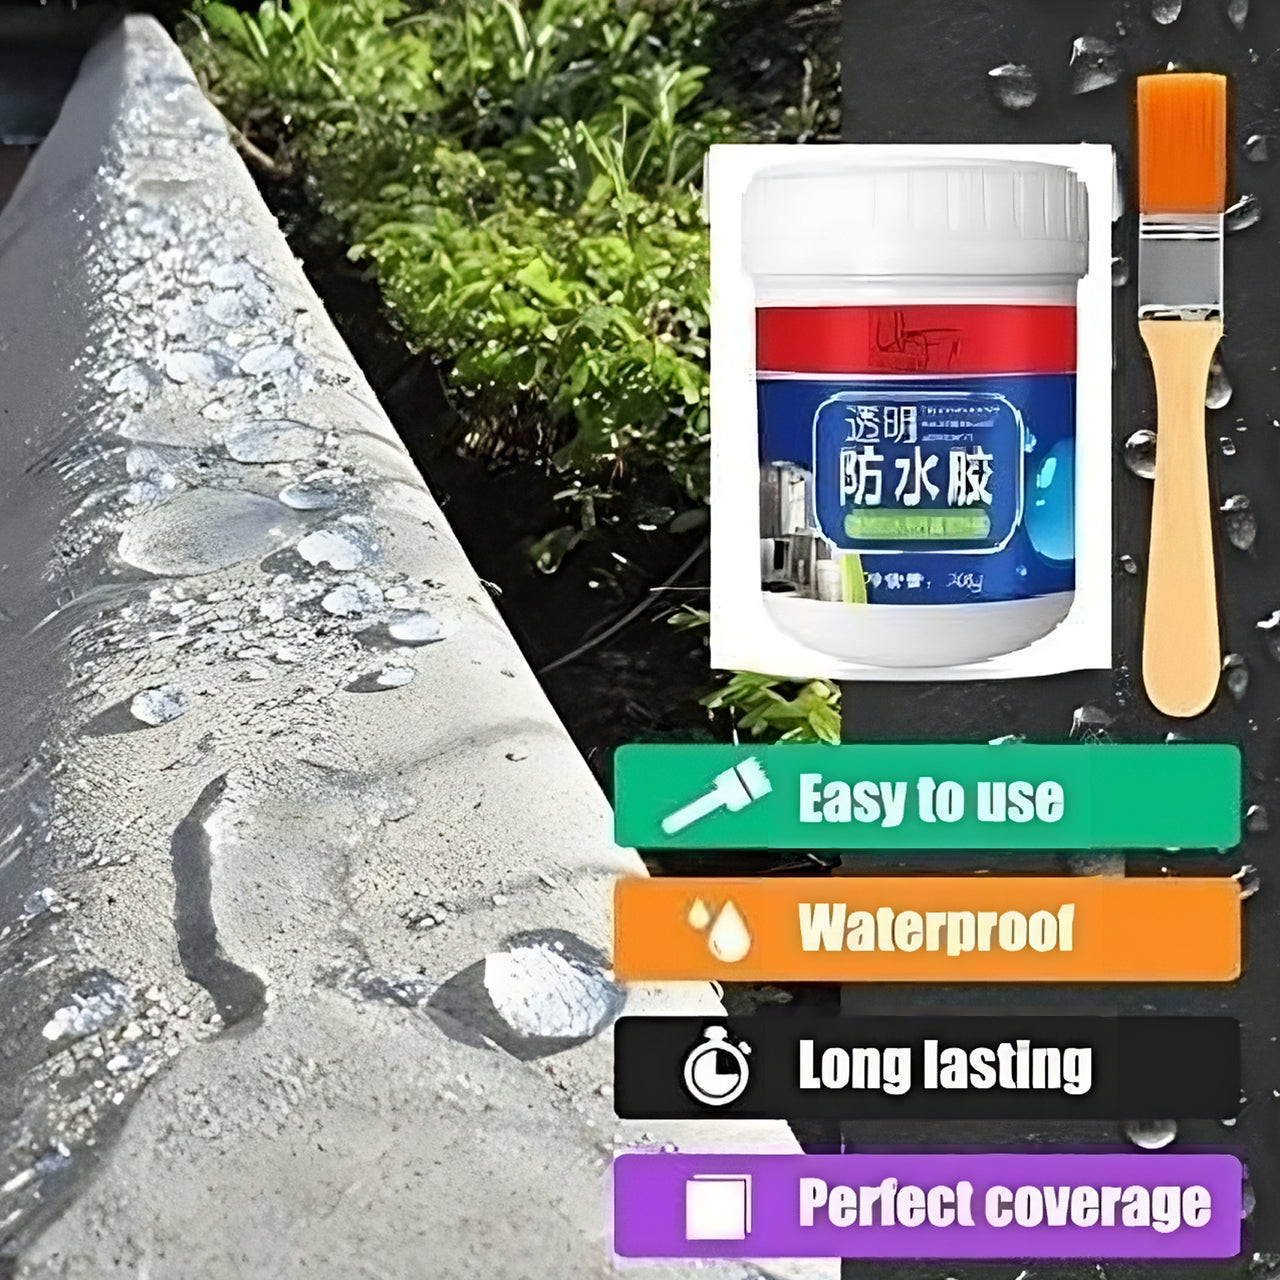 Transparent Waterproof Glue with Brush, Leakage Protection Outdoor Bathroom Wall Tile Window Roof, Anti-Leakage Agent, sealant glue, Roof Sealant Waterproof Gel Dime Store